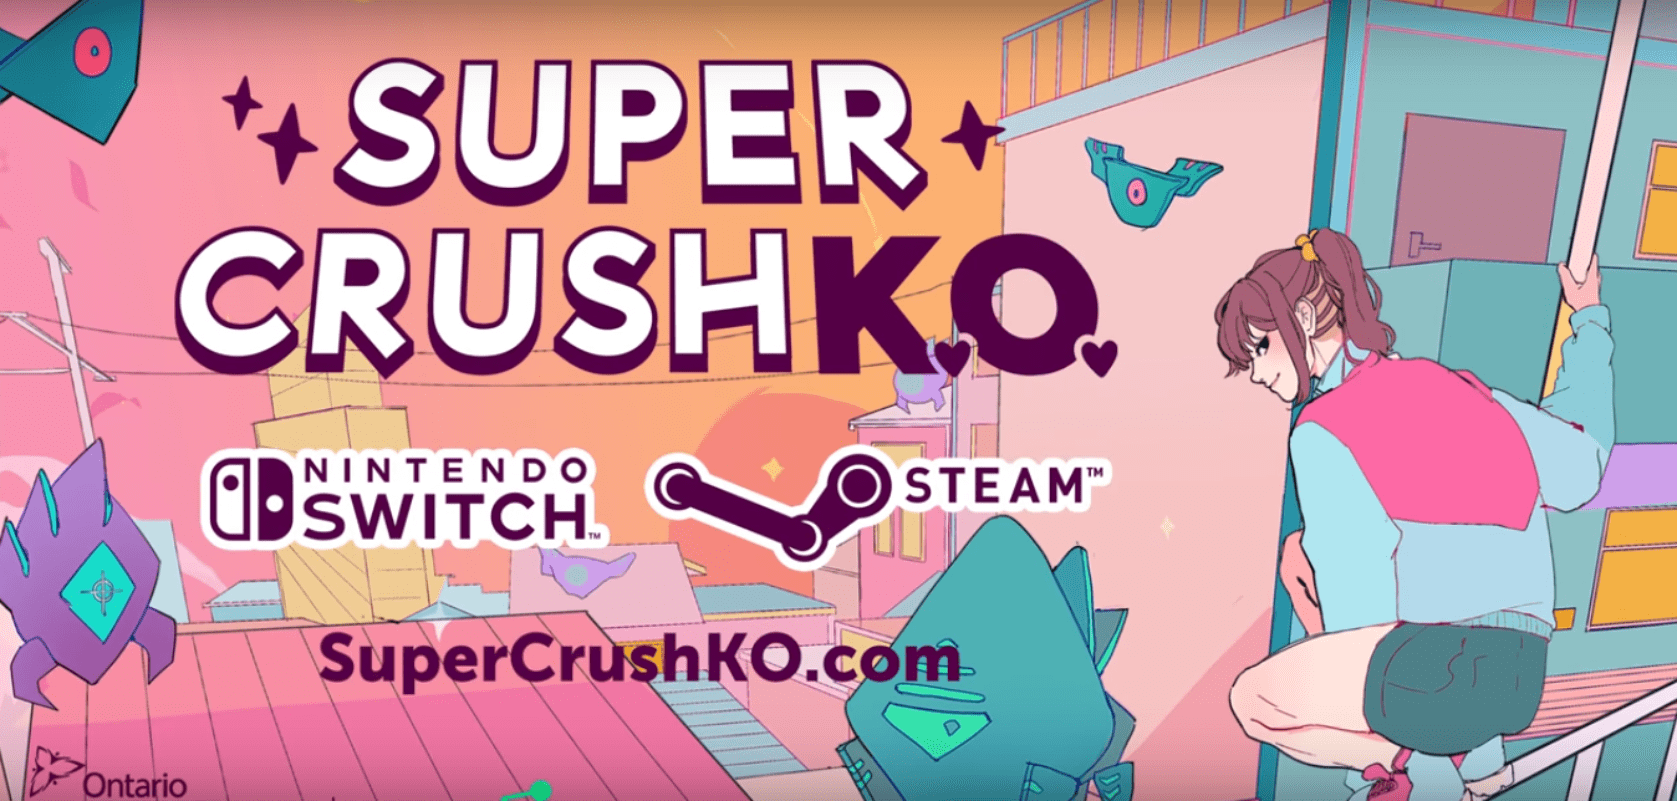 Rescue A Kitty From Diabolical Robots In The Colorful Game Super Crush KO, Coming Out For Nintendo Switch And PC